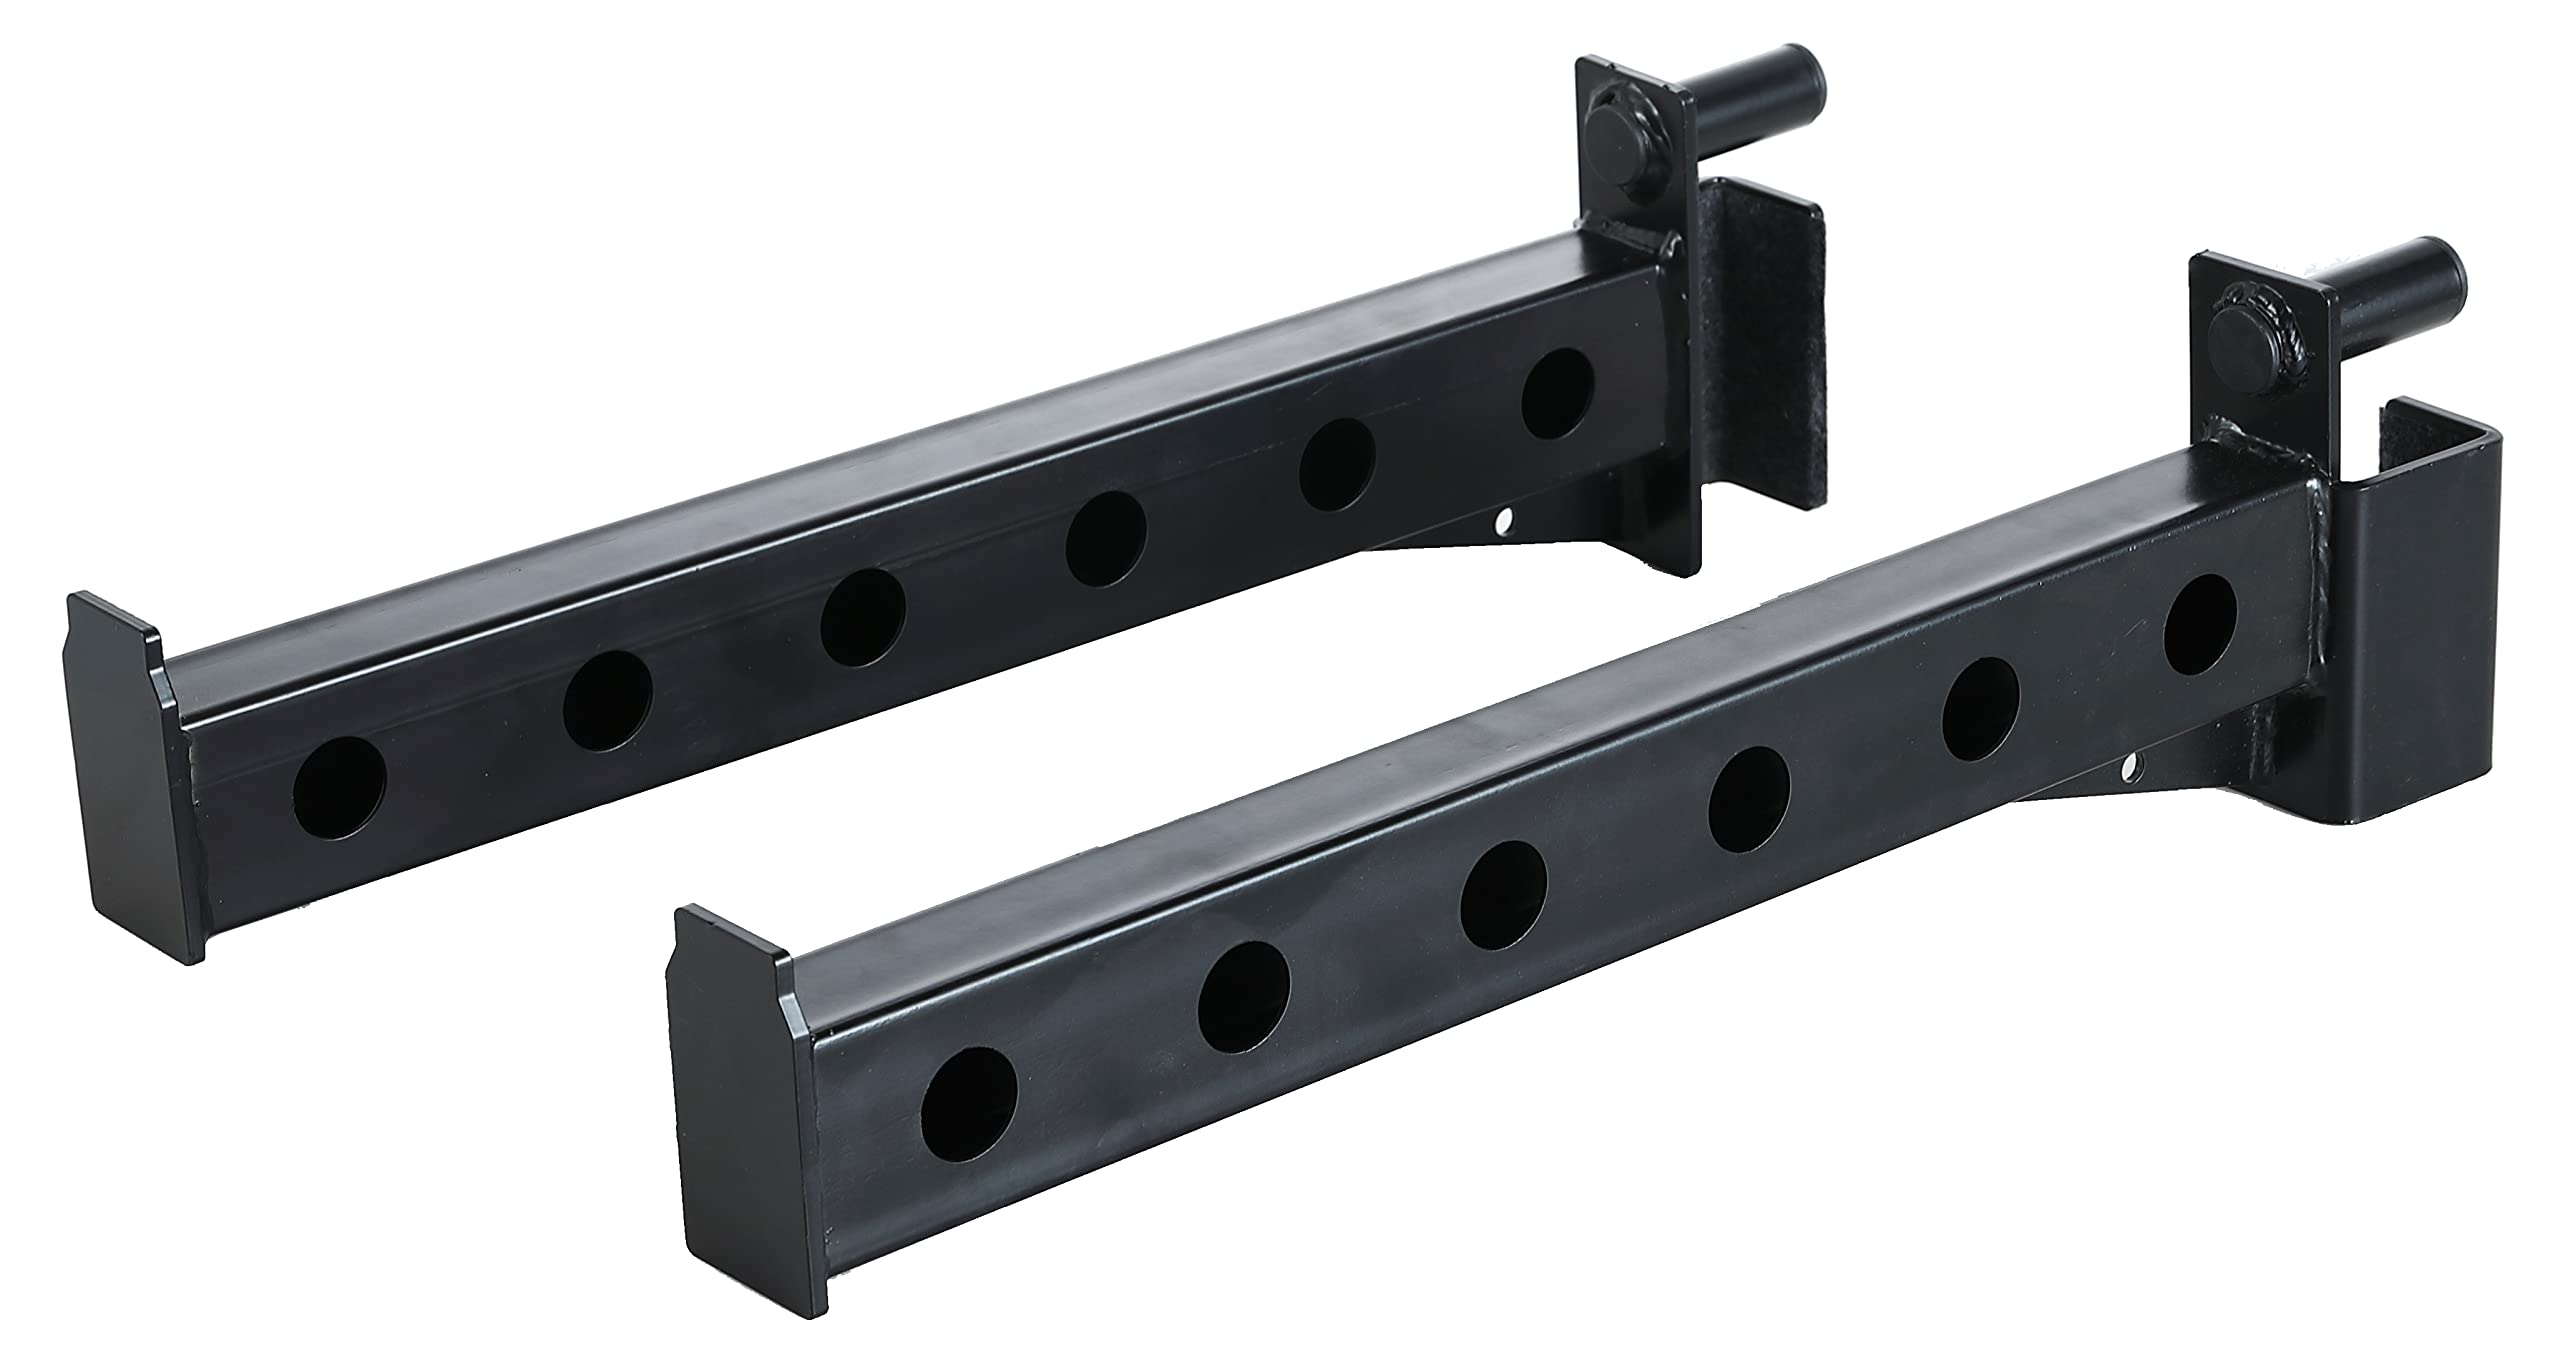 BalanceFrom Power cage Accessories - T-Bar Weight Plate Holders Dip Bars Spotter Arms J-Hooks for 2x2 Racks with 1 Hole